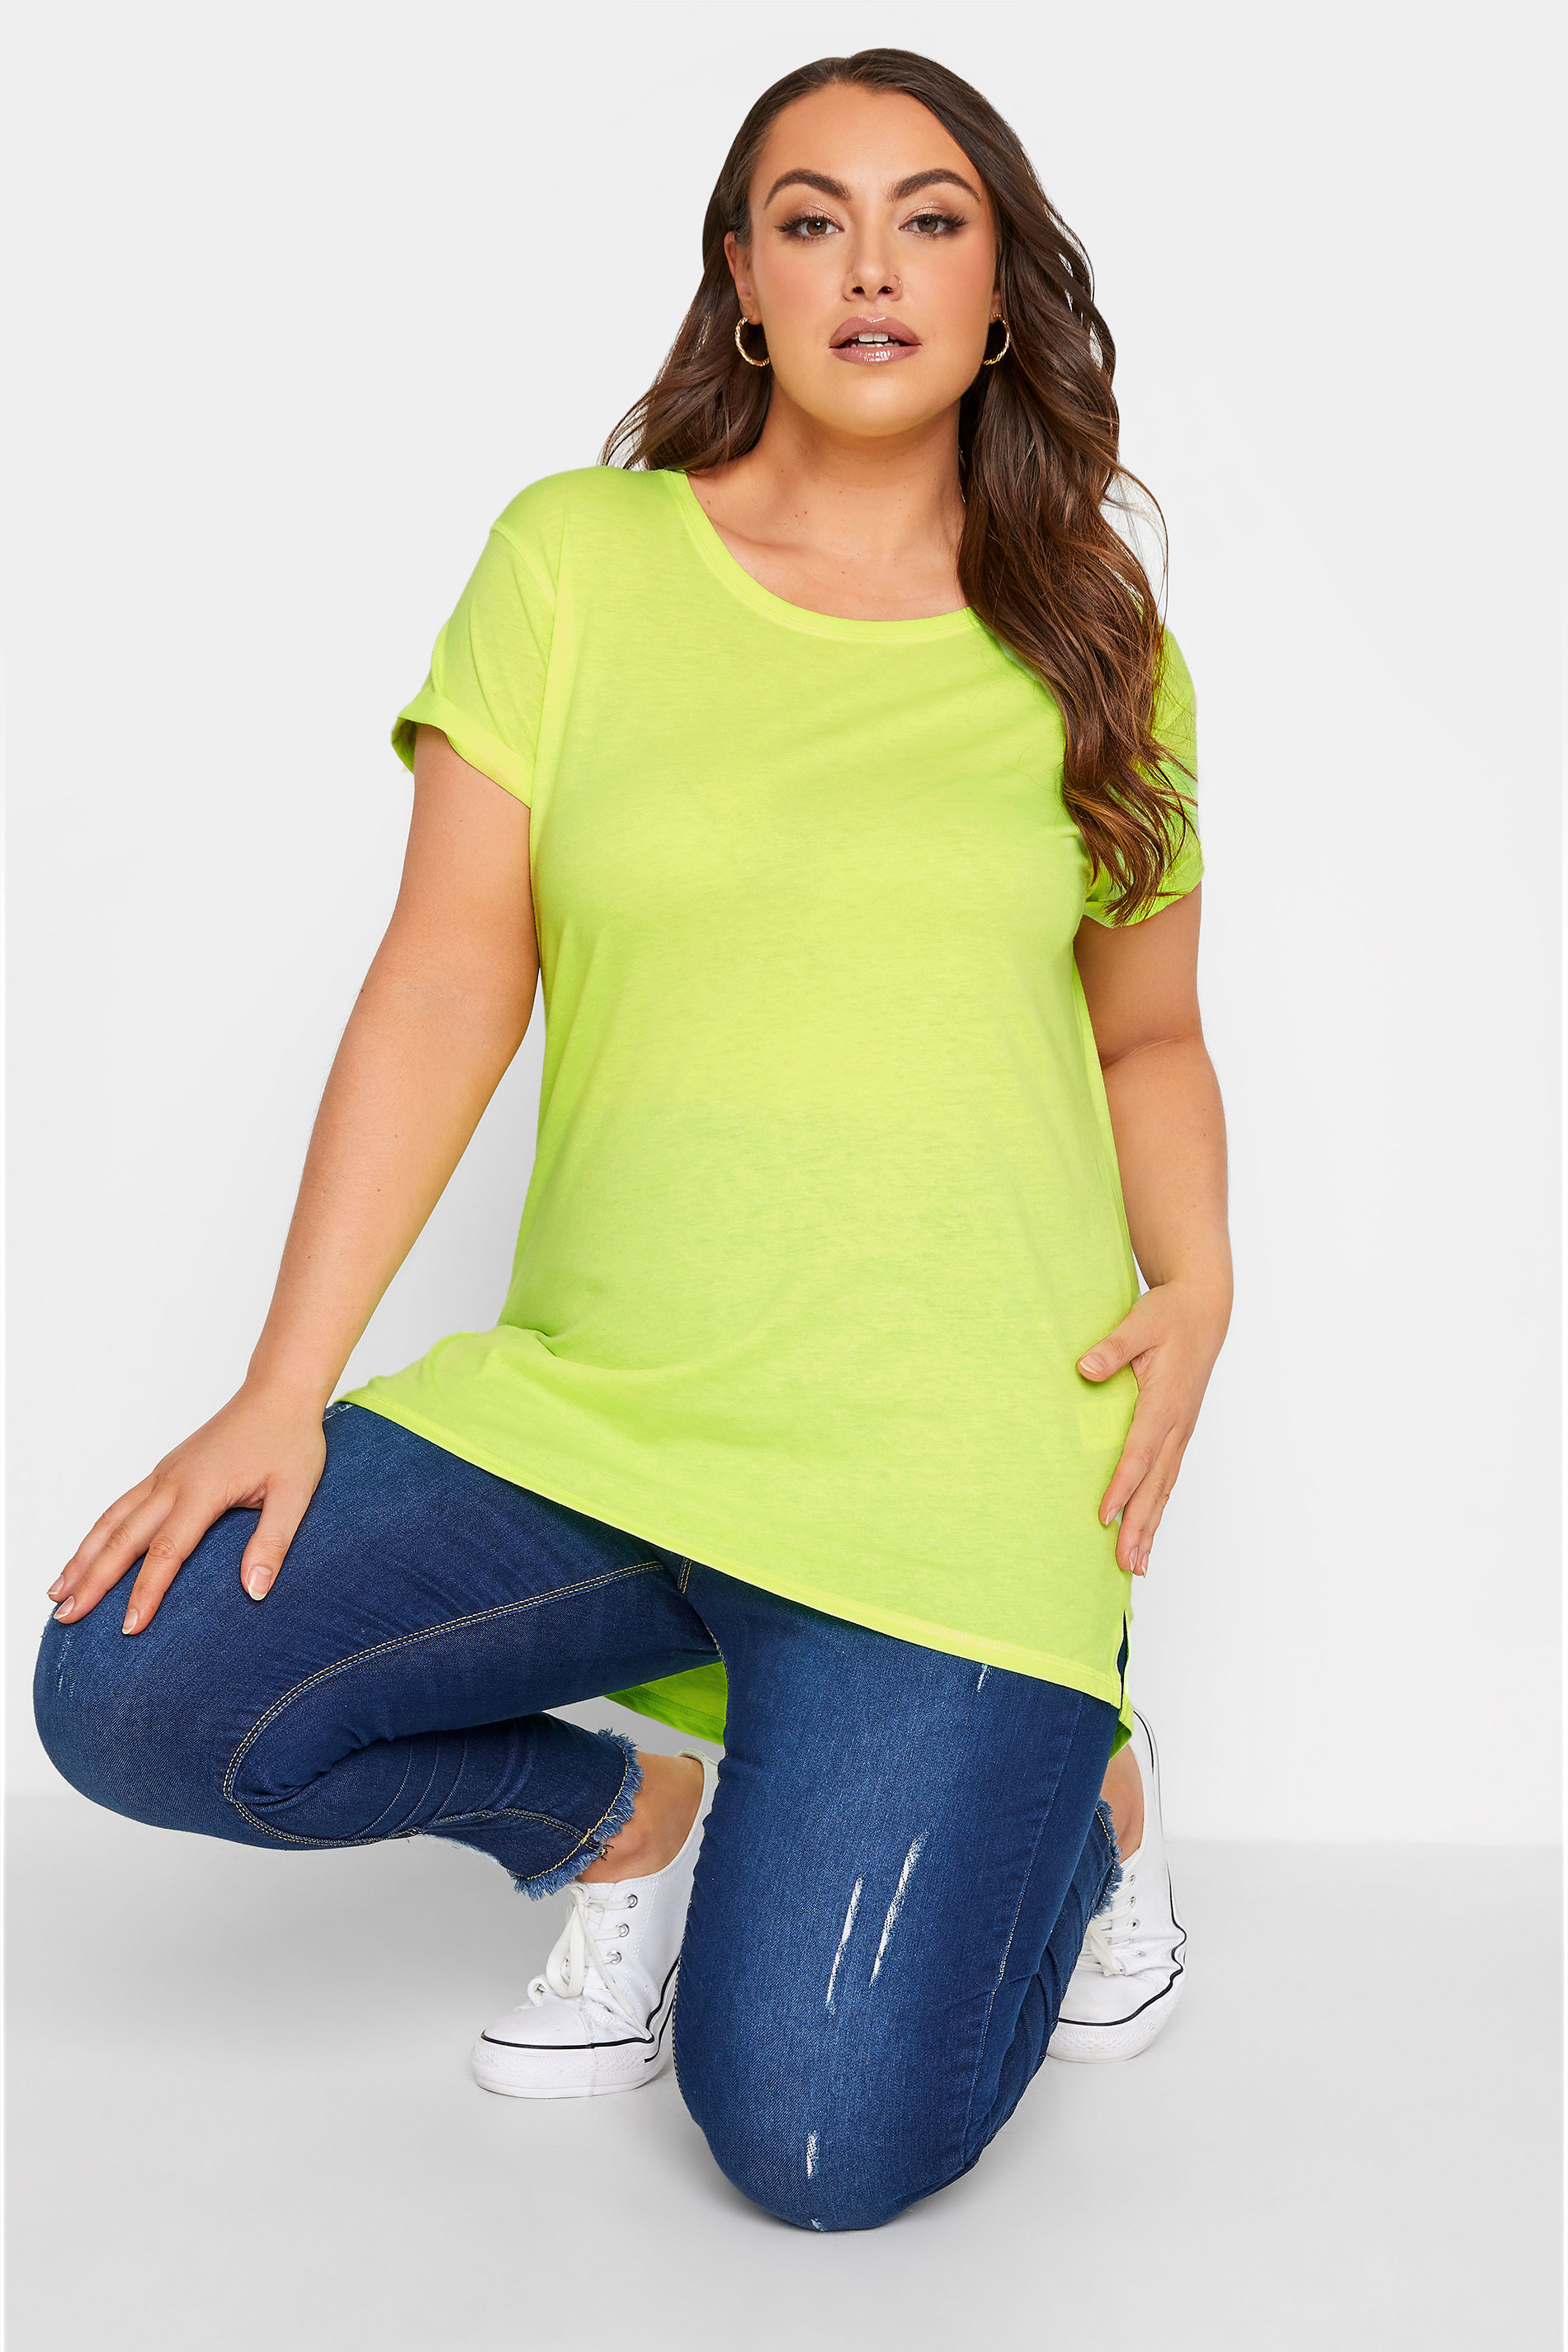 Grande taille  Tops Grande taille  T-Shirts | T-Shirt Vert Fluo Manches Courtes en Jersey - PS78686